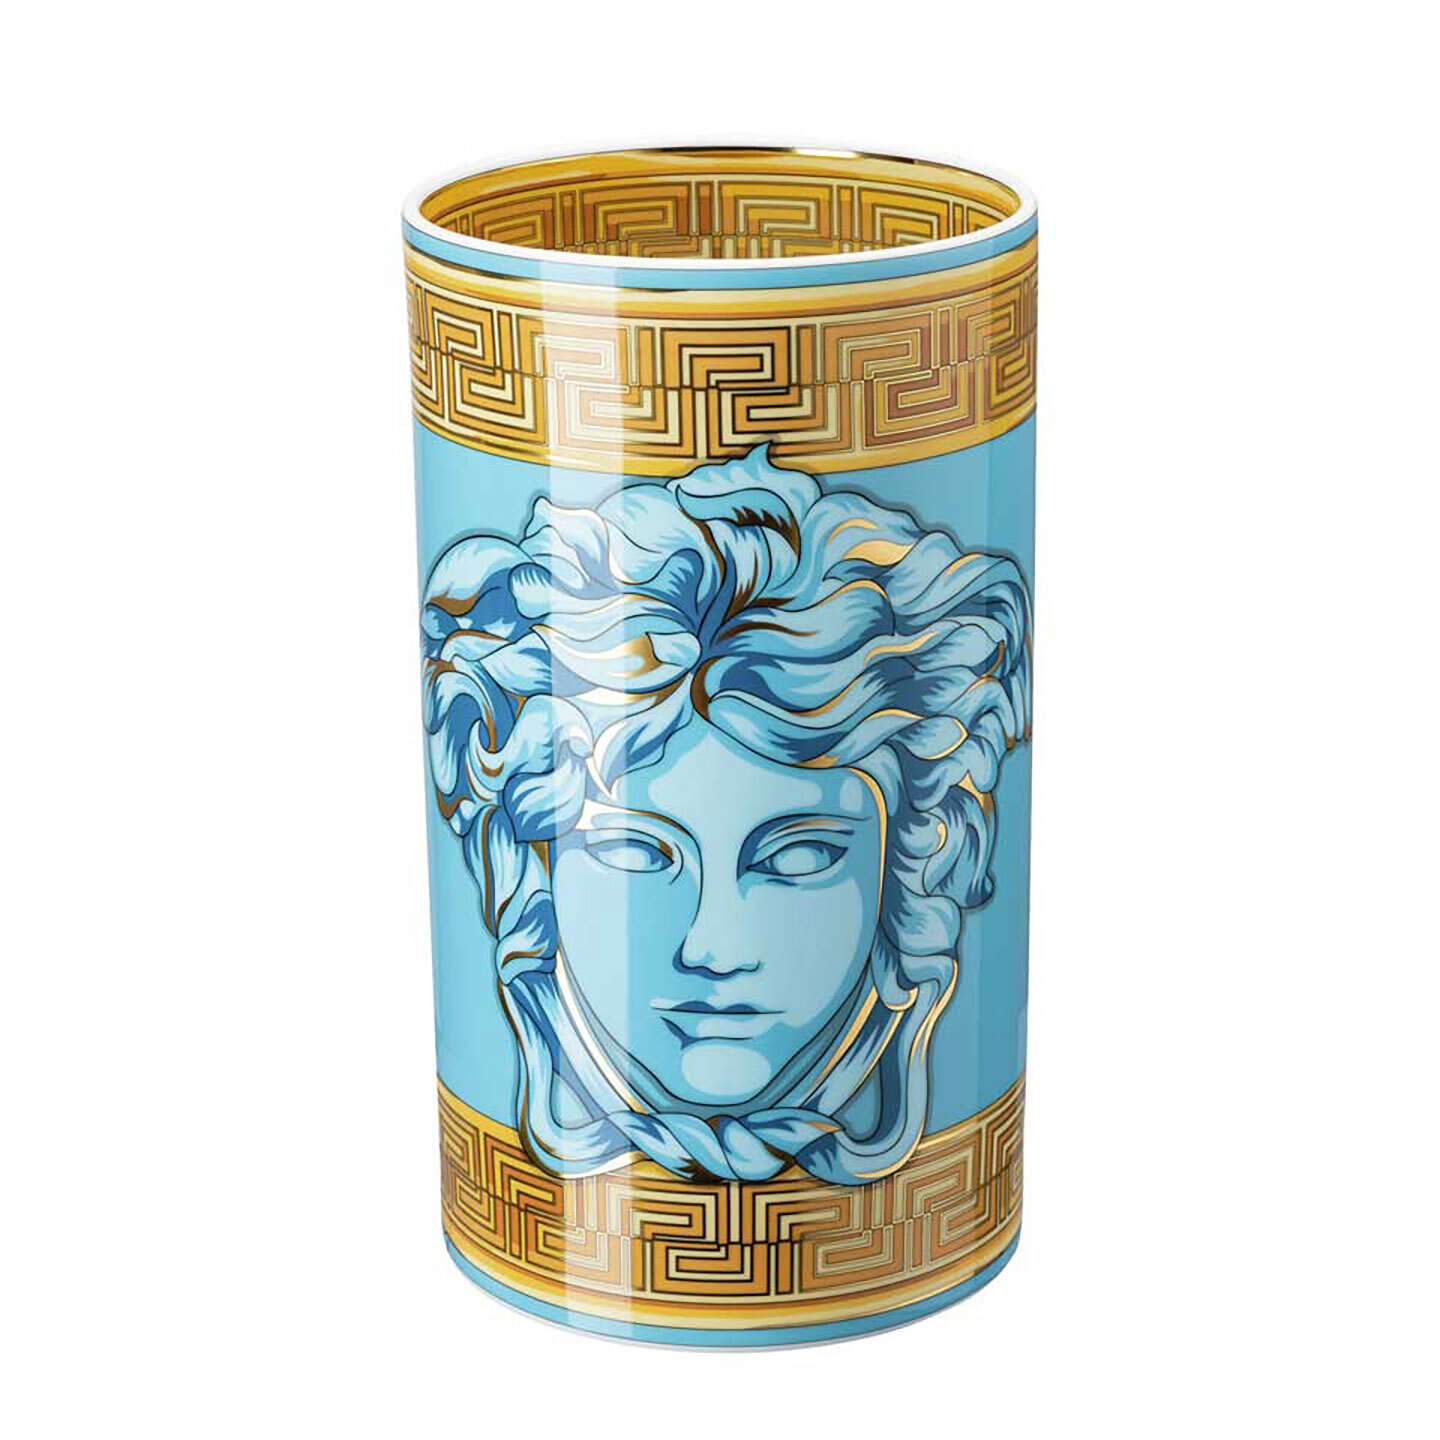 Versace Medusa Amplified Blue Coin Vase 11 3/4 Inch